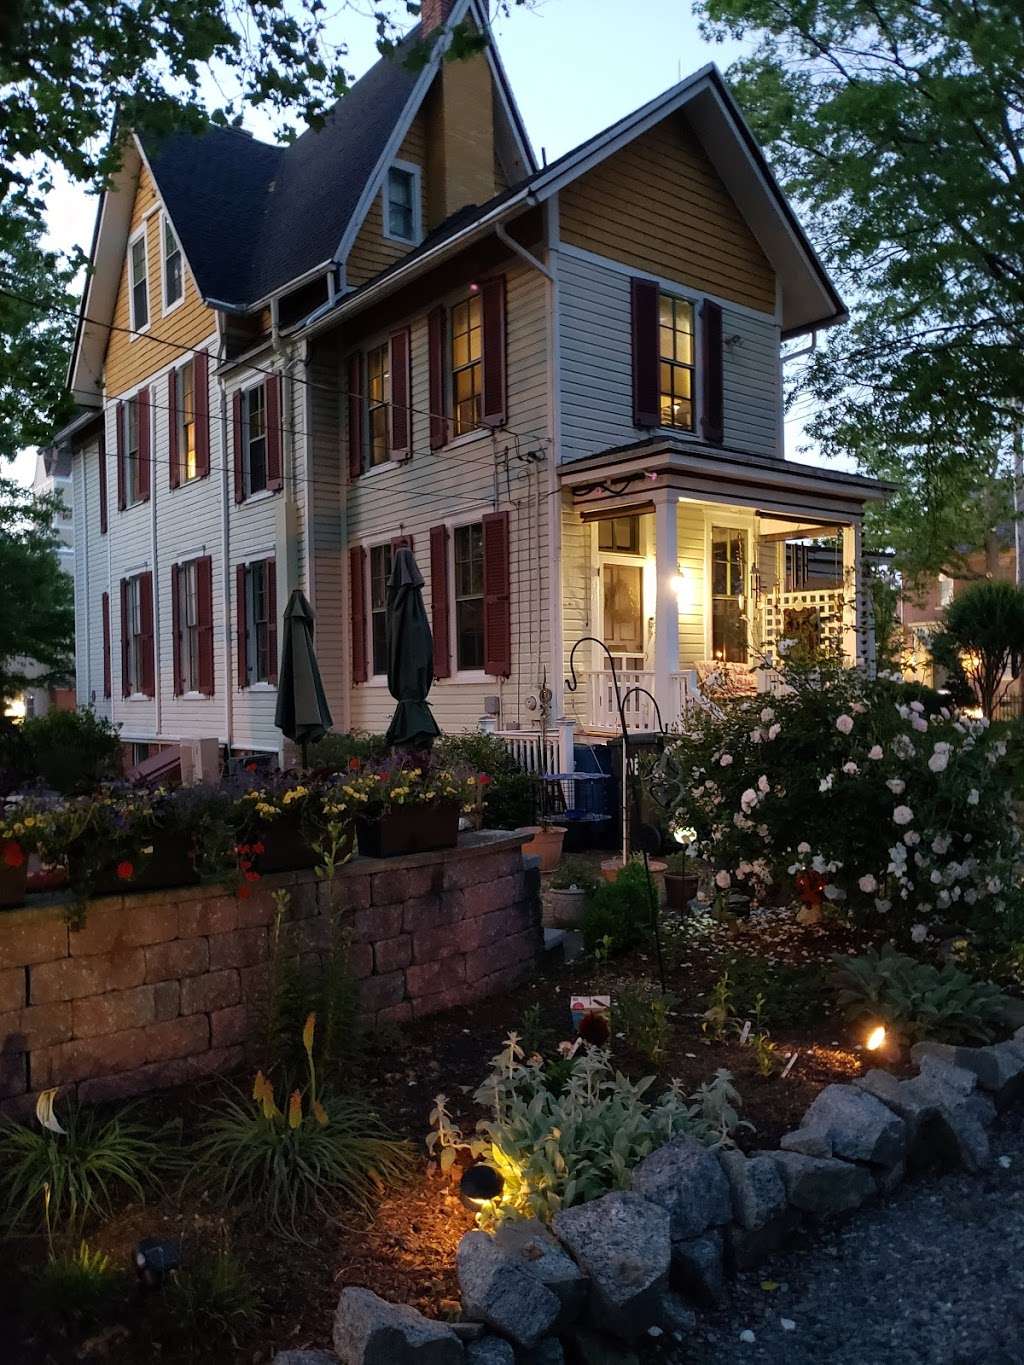 Bishops House Bed and Breakfast | 214 Goldsborough St, Easton, MD 21601, USA | Phone: (410) 820-7290